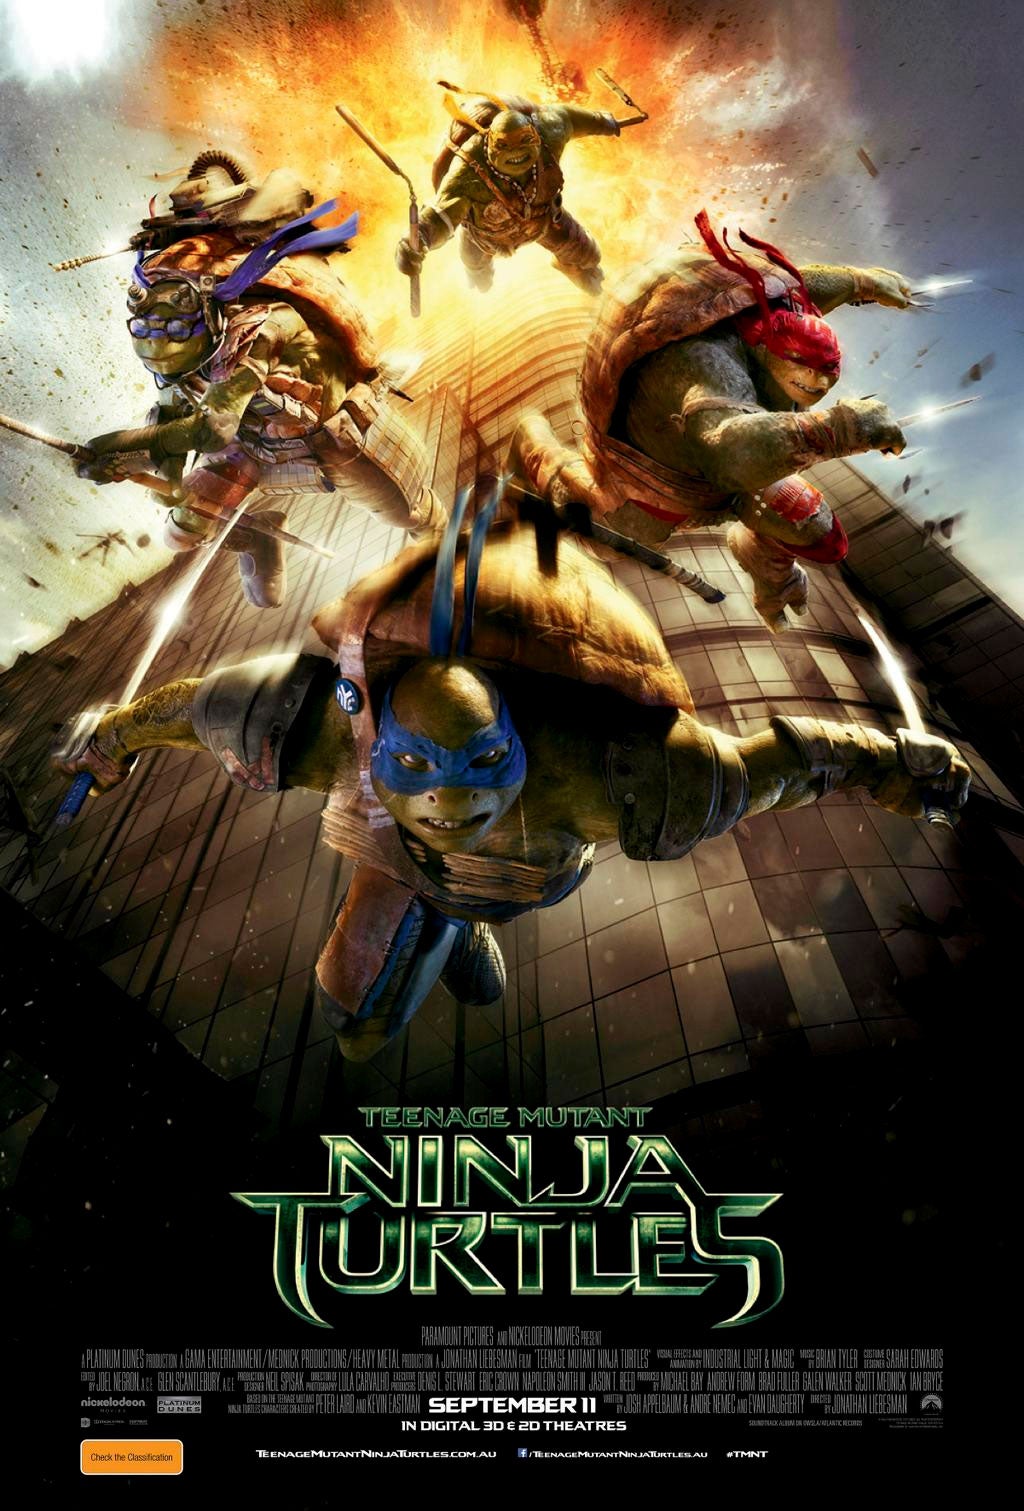 Image for Teenage Mutant Ninja Turtles poster includes "September 11" and exploding skyscraper